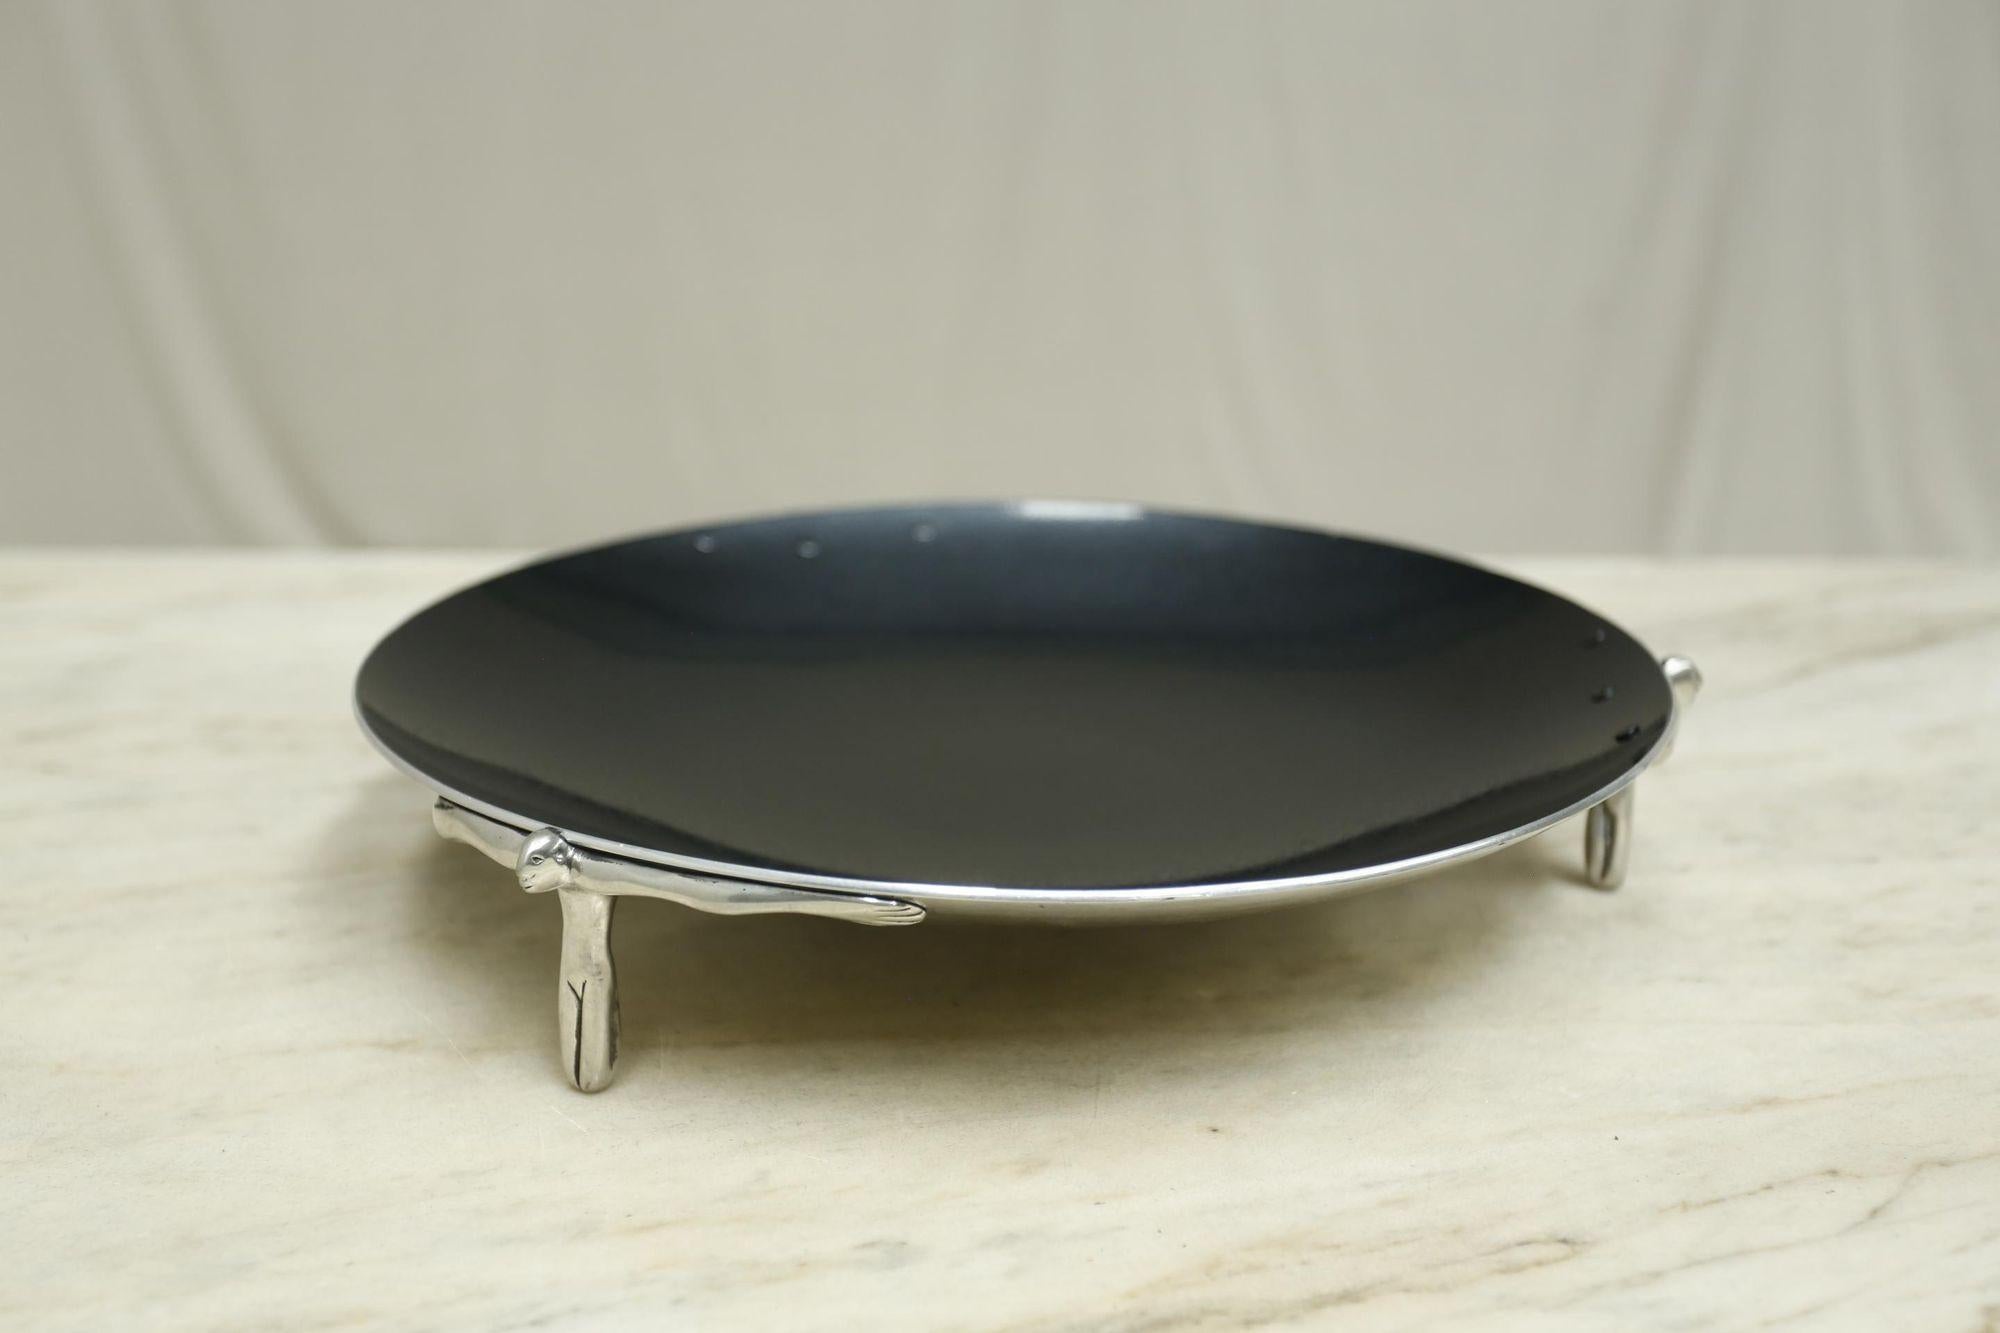 This is a beautifully made 20th century pewter dish by renowned pewter artist Carrol Boyes. The quality is superb with a polish underside and deep black beaten top. The dish stands on three feet that are actually figures. Great design and a hugely